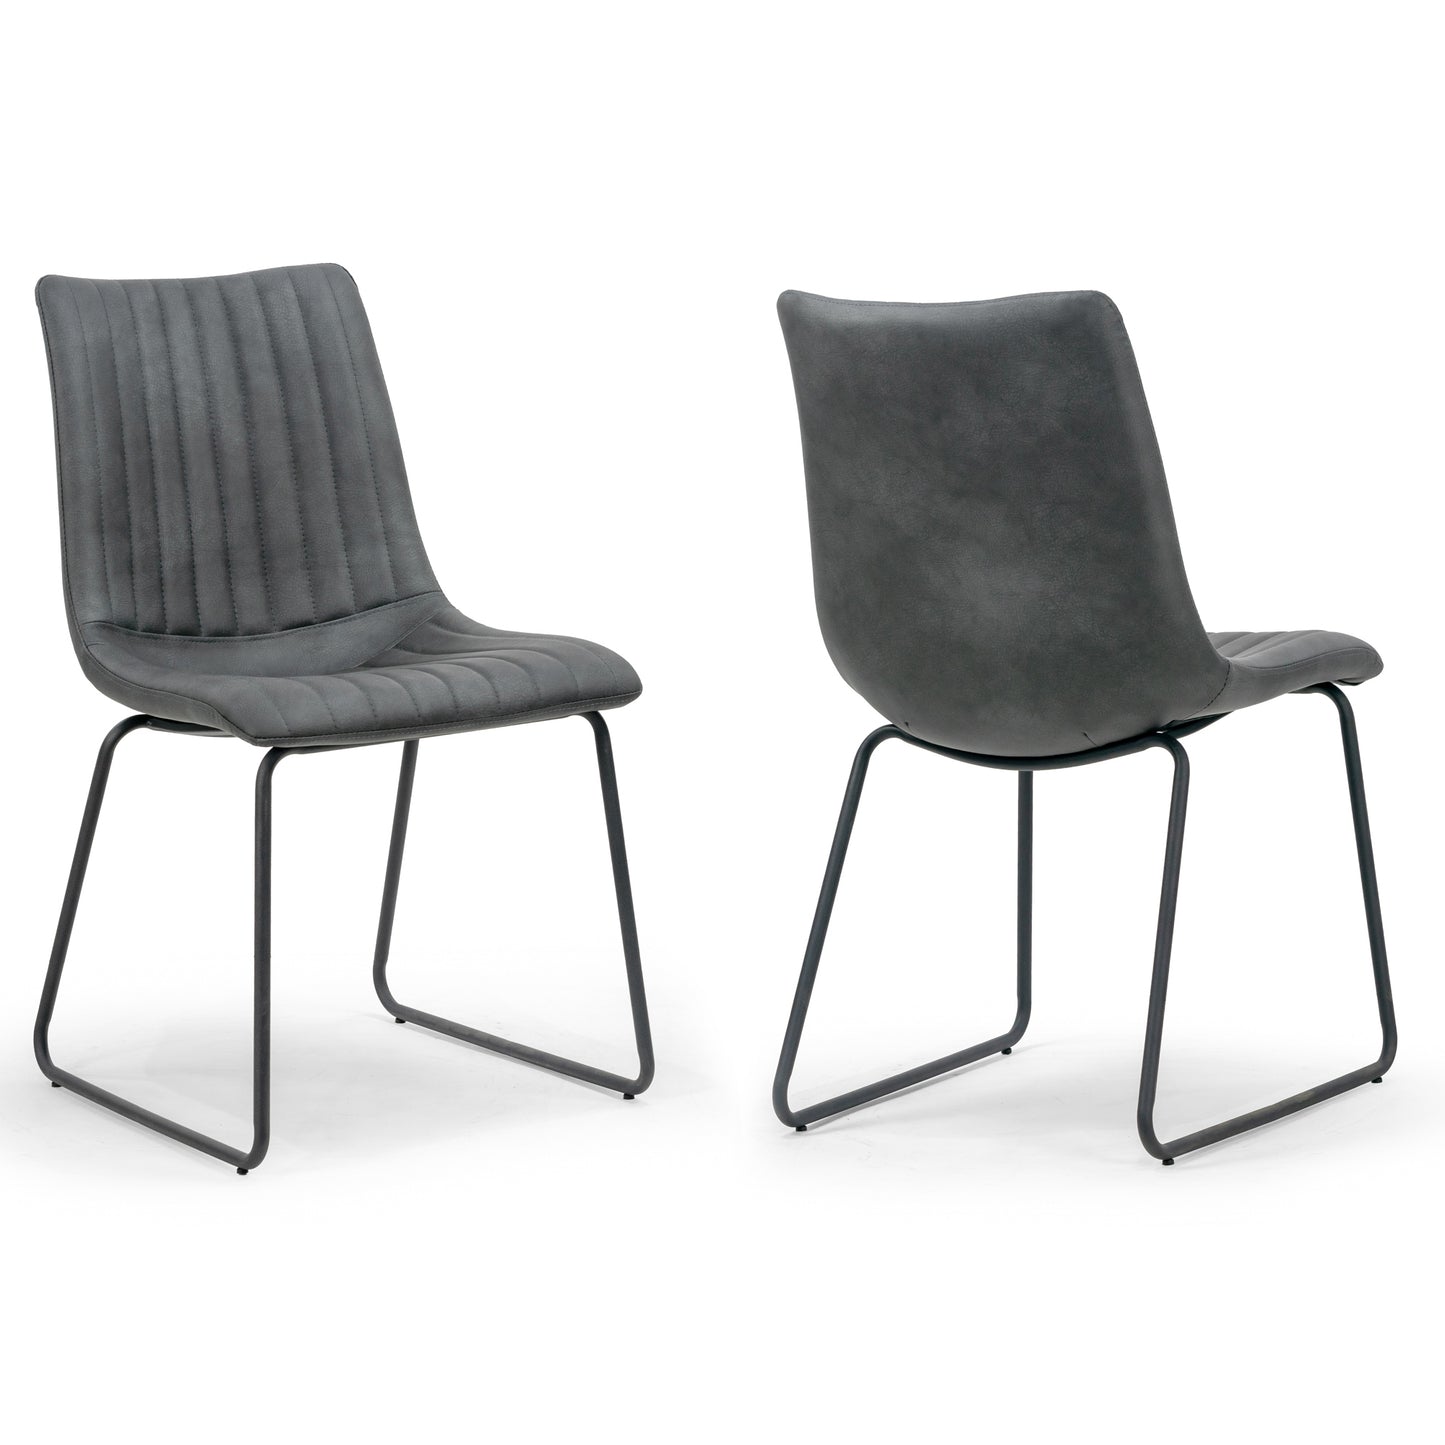 Set of 2 Arash Grey Distressed Faux Leather Dining Chair with Decorative Stitching